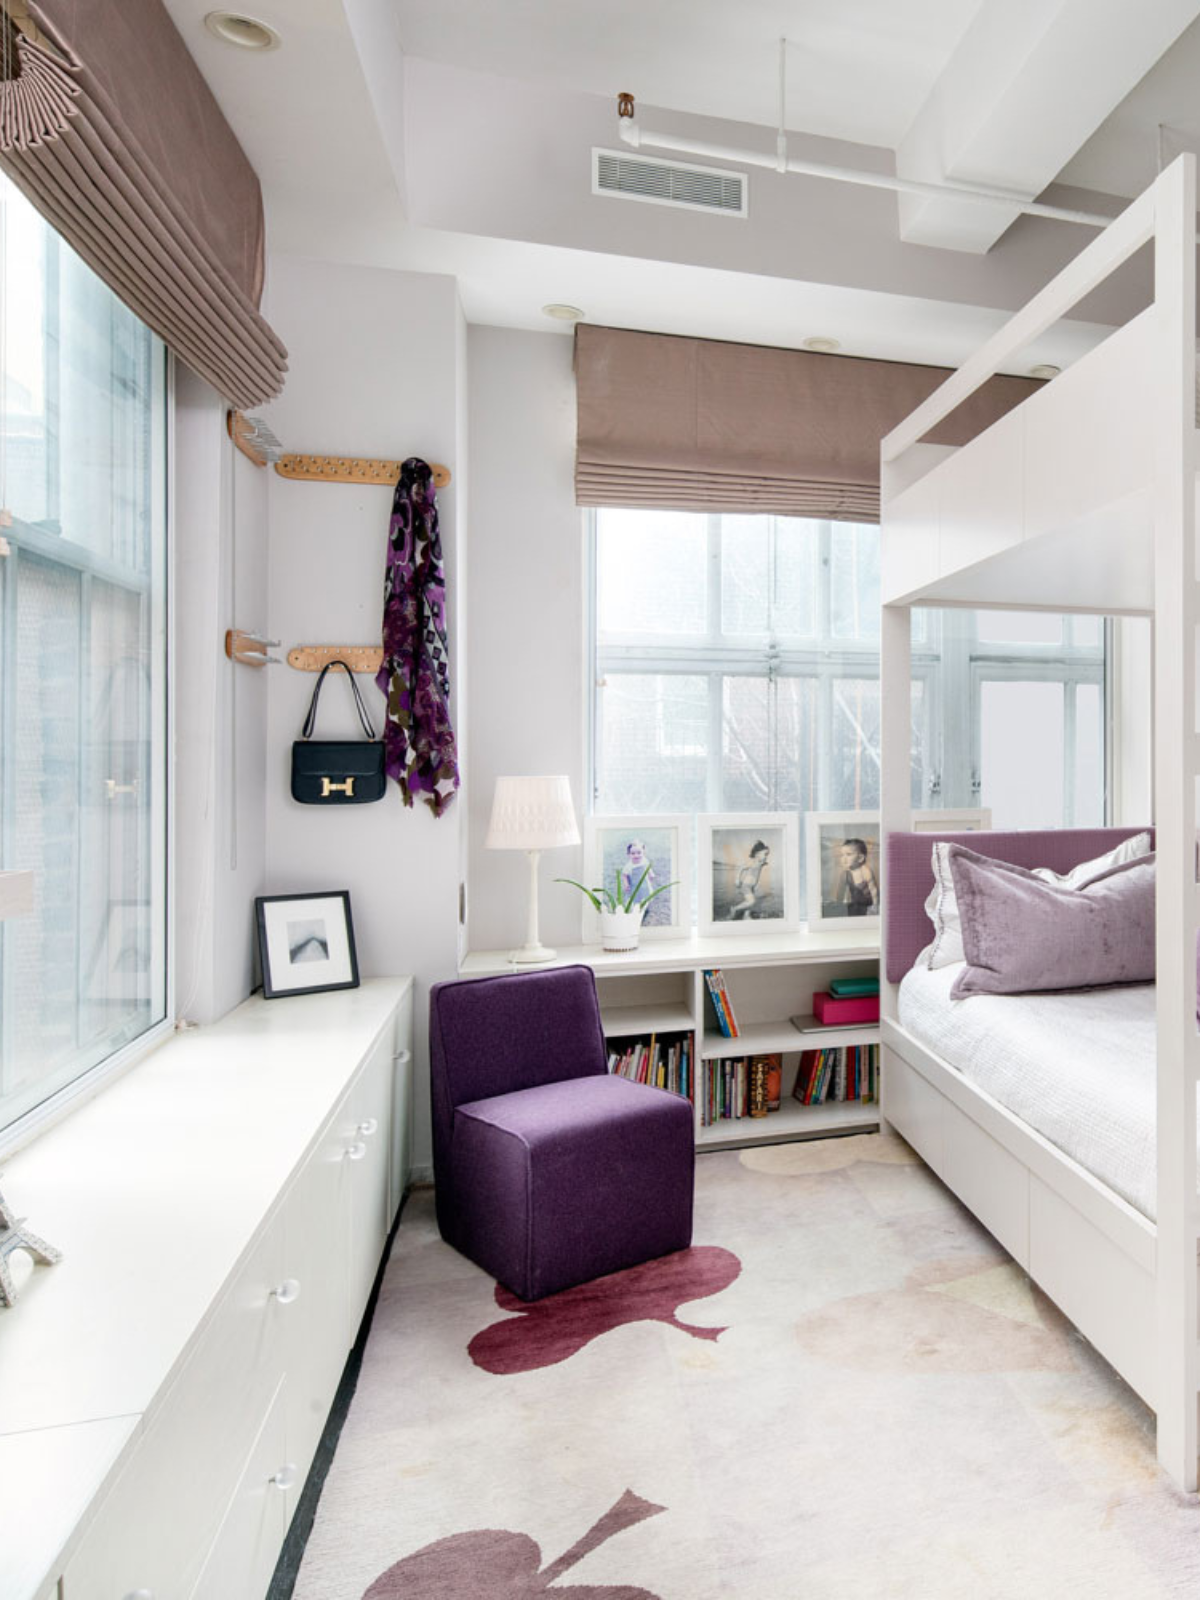 a chic looking bedroom with white bed, purple pillow accents, purple upholstered accent chair and brown fabric window shade